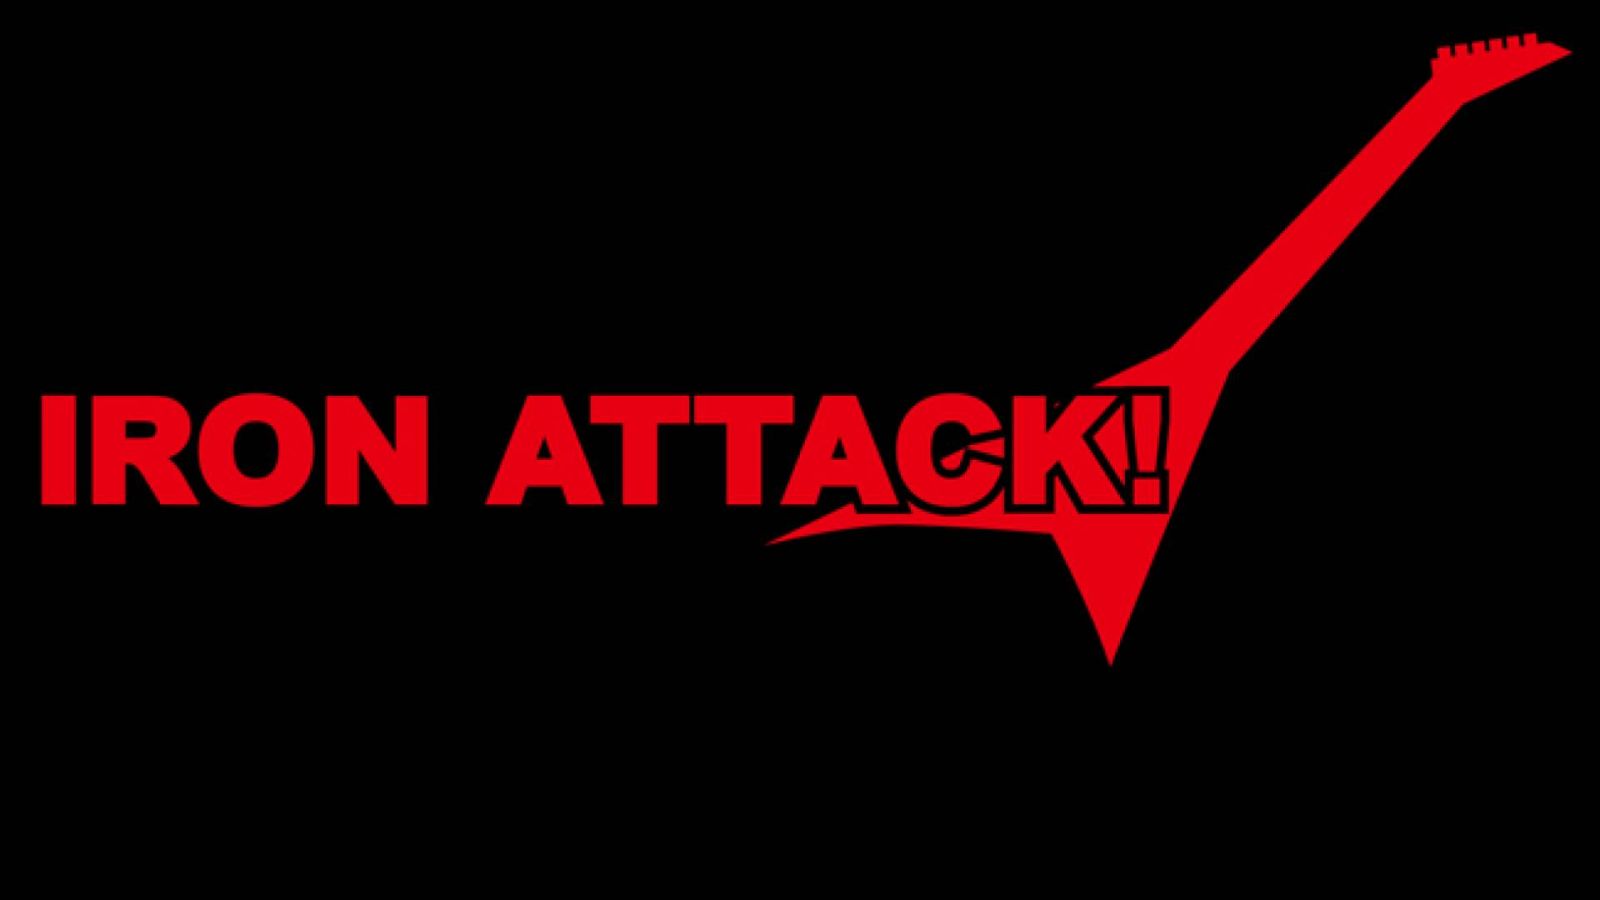 Les vœux d'IRON ATTACK! © 2015 IRON ATTACK! All rights reserved.